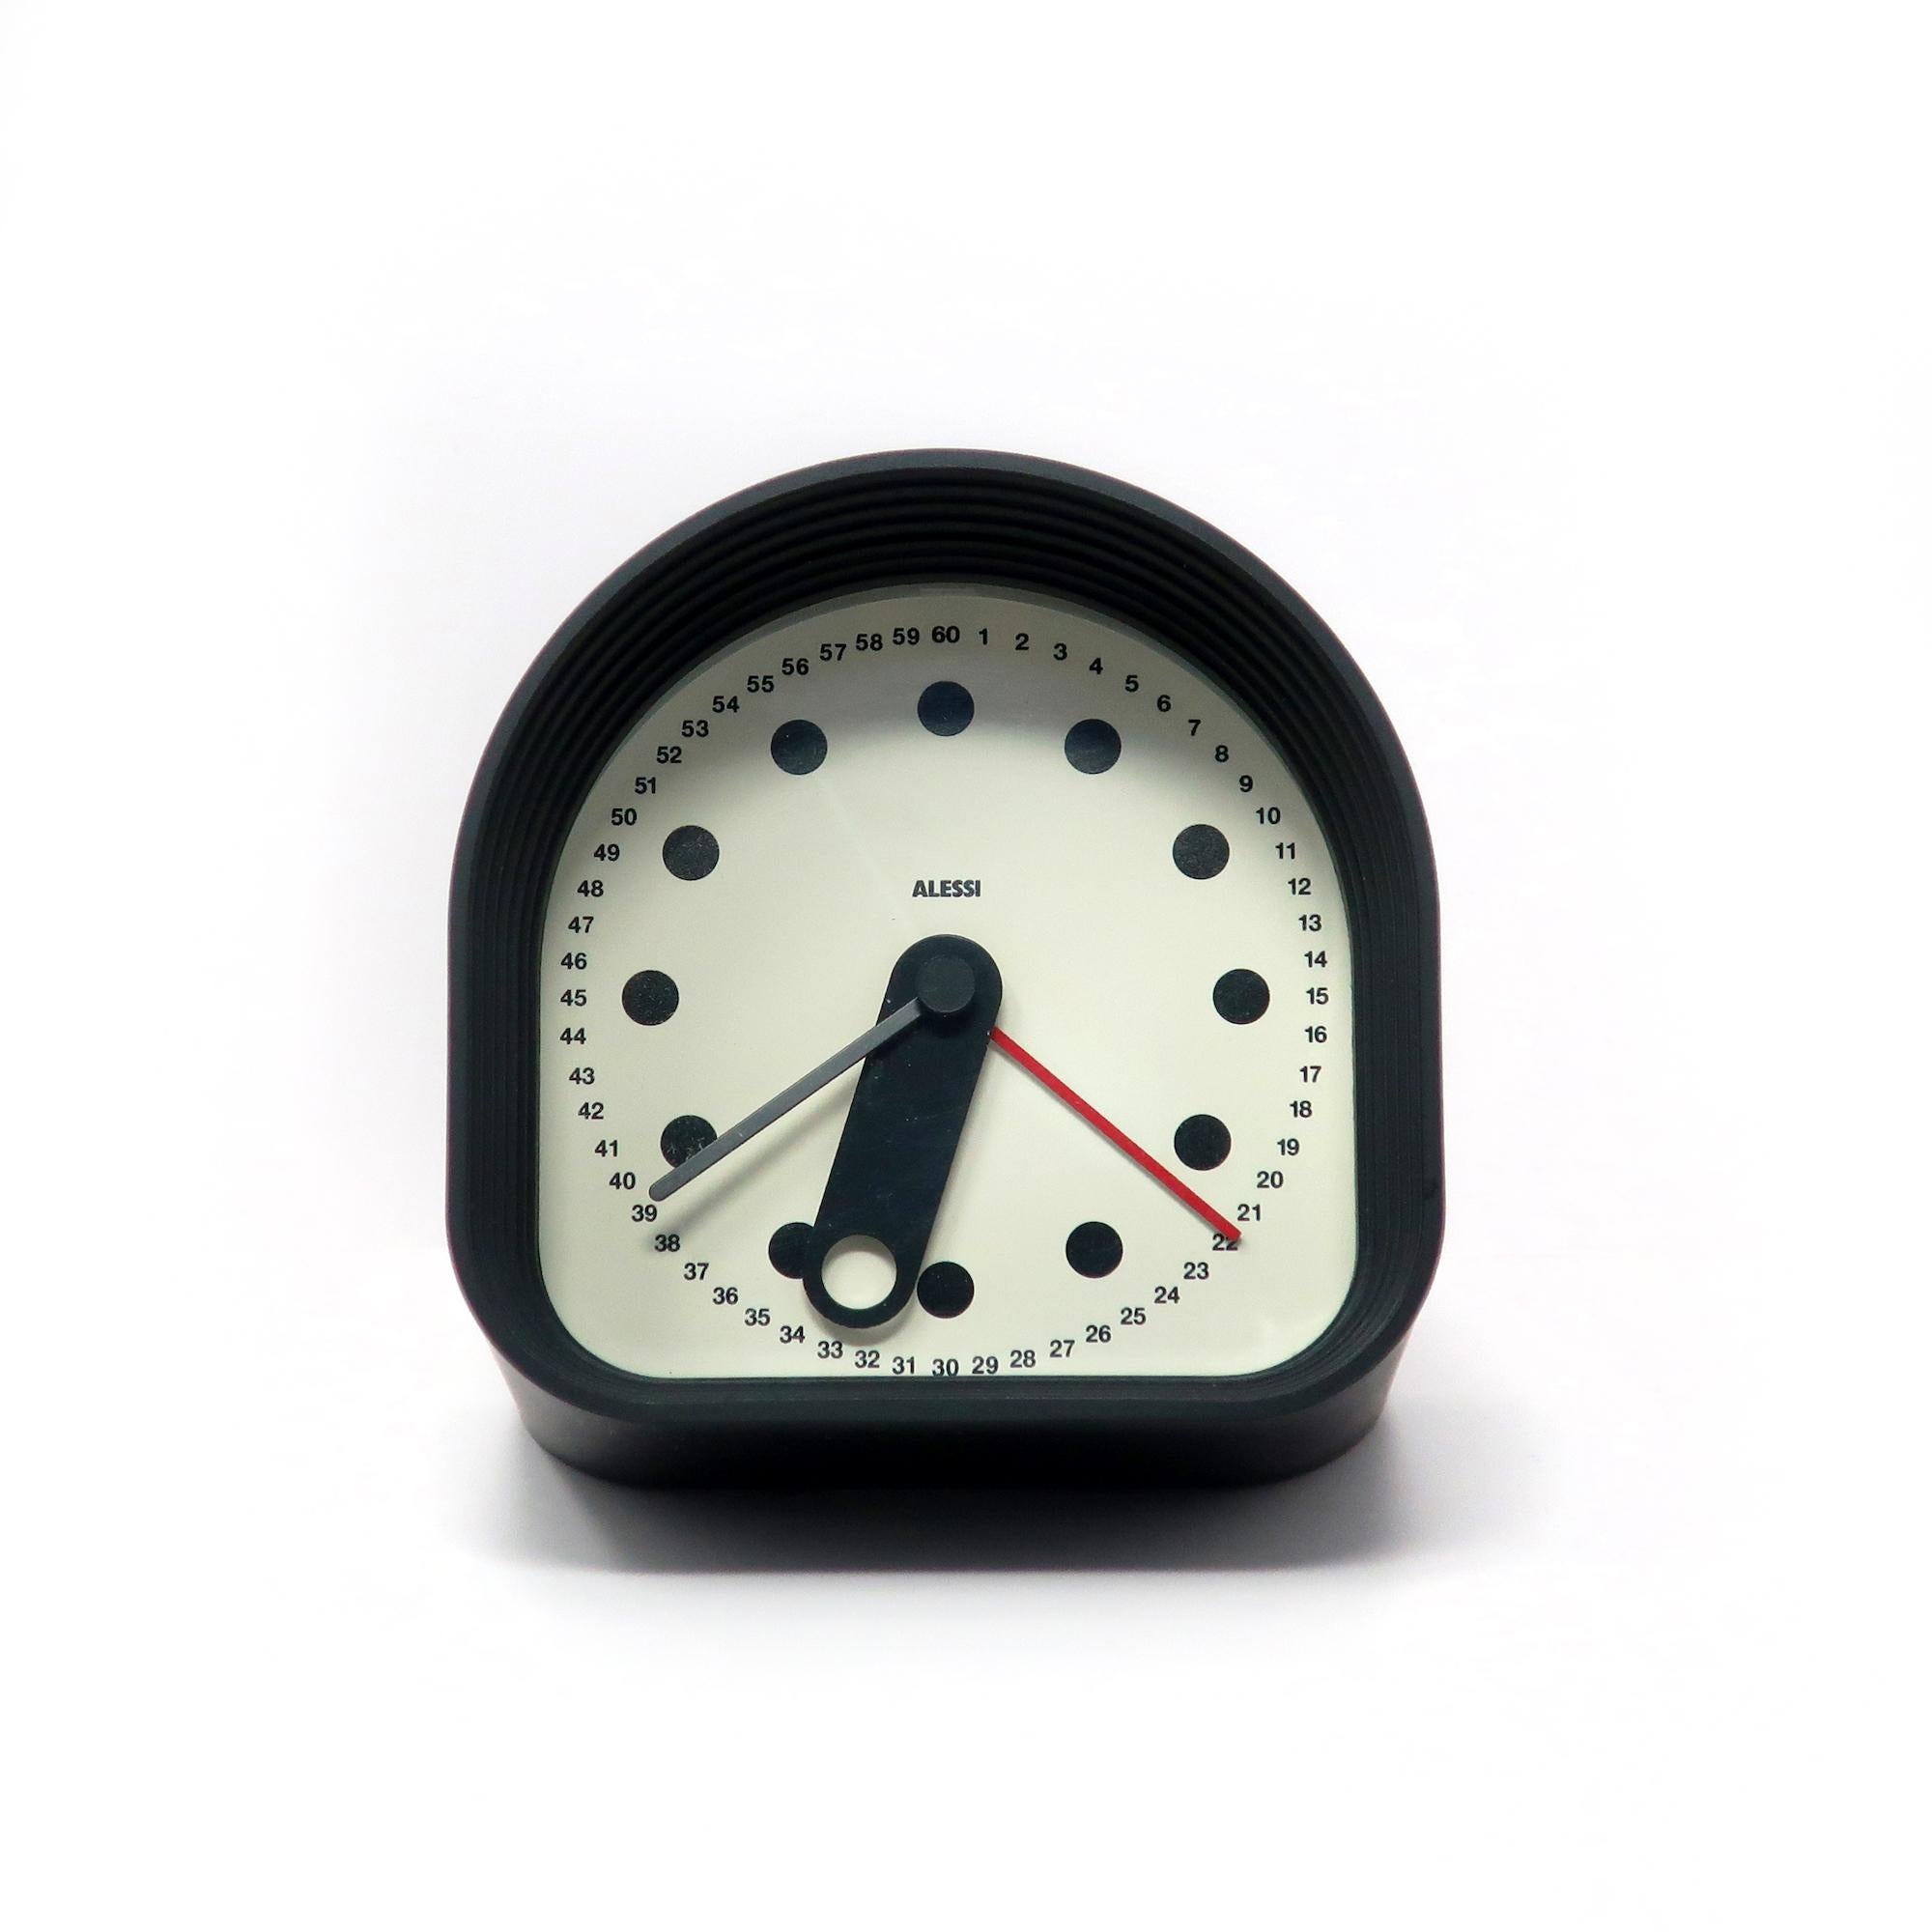 The Optic clock designed by Joe Colombo and produced since the late 1980s by Alessi is a rare and collectible piece of design history.  Imagined by the legendary Italian designer, the clock features a black case, black hands, and white face, and